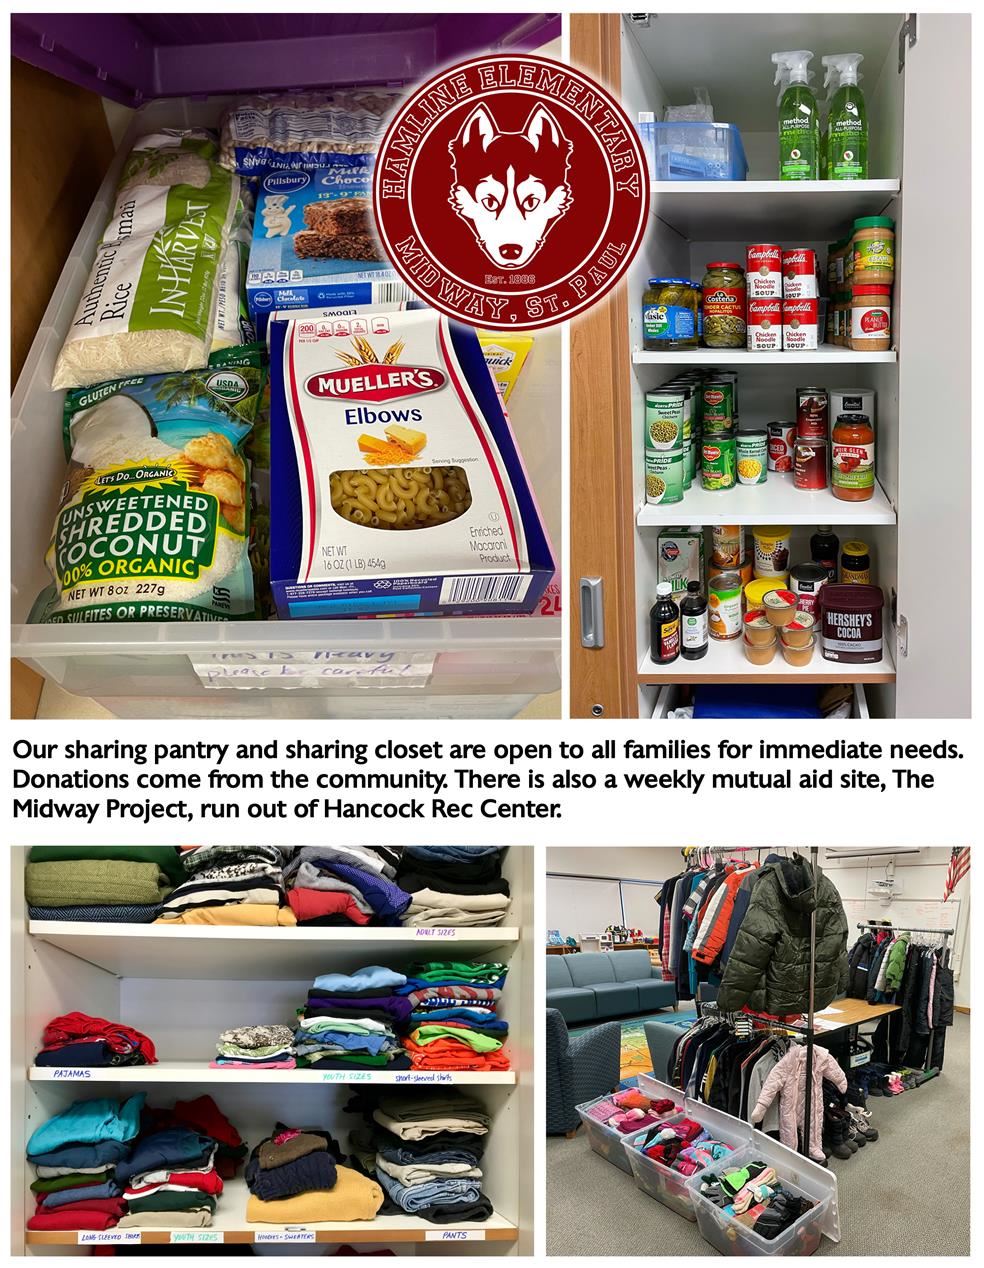 A collage of images showing food on shelves and in a bin, winter coats and boots, and clothing on shelves.